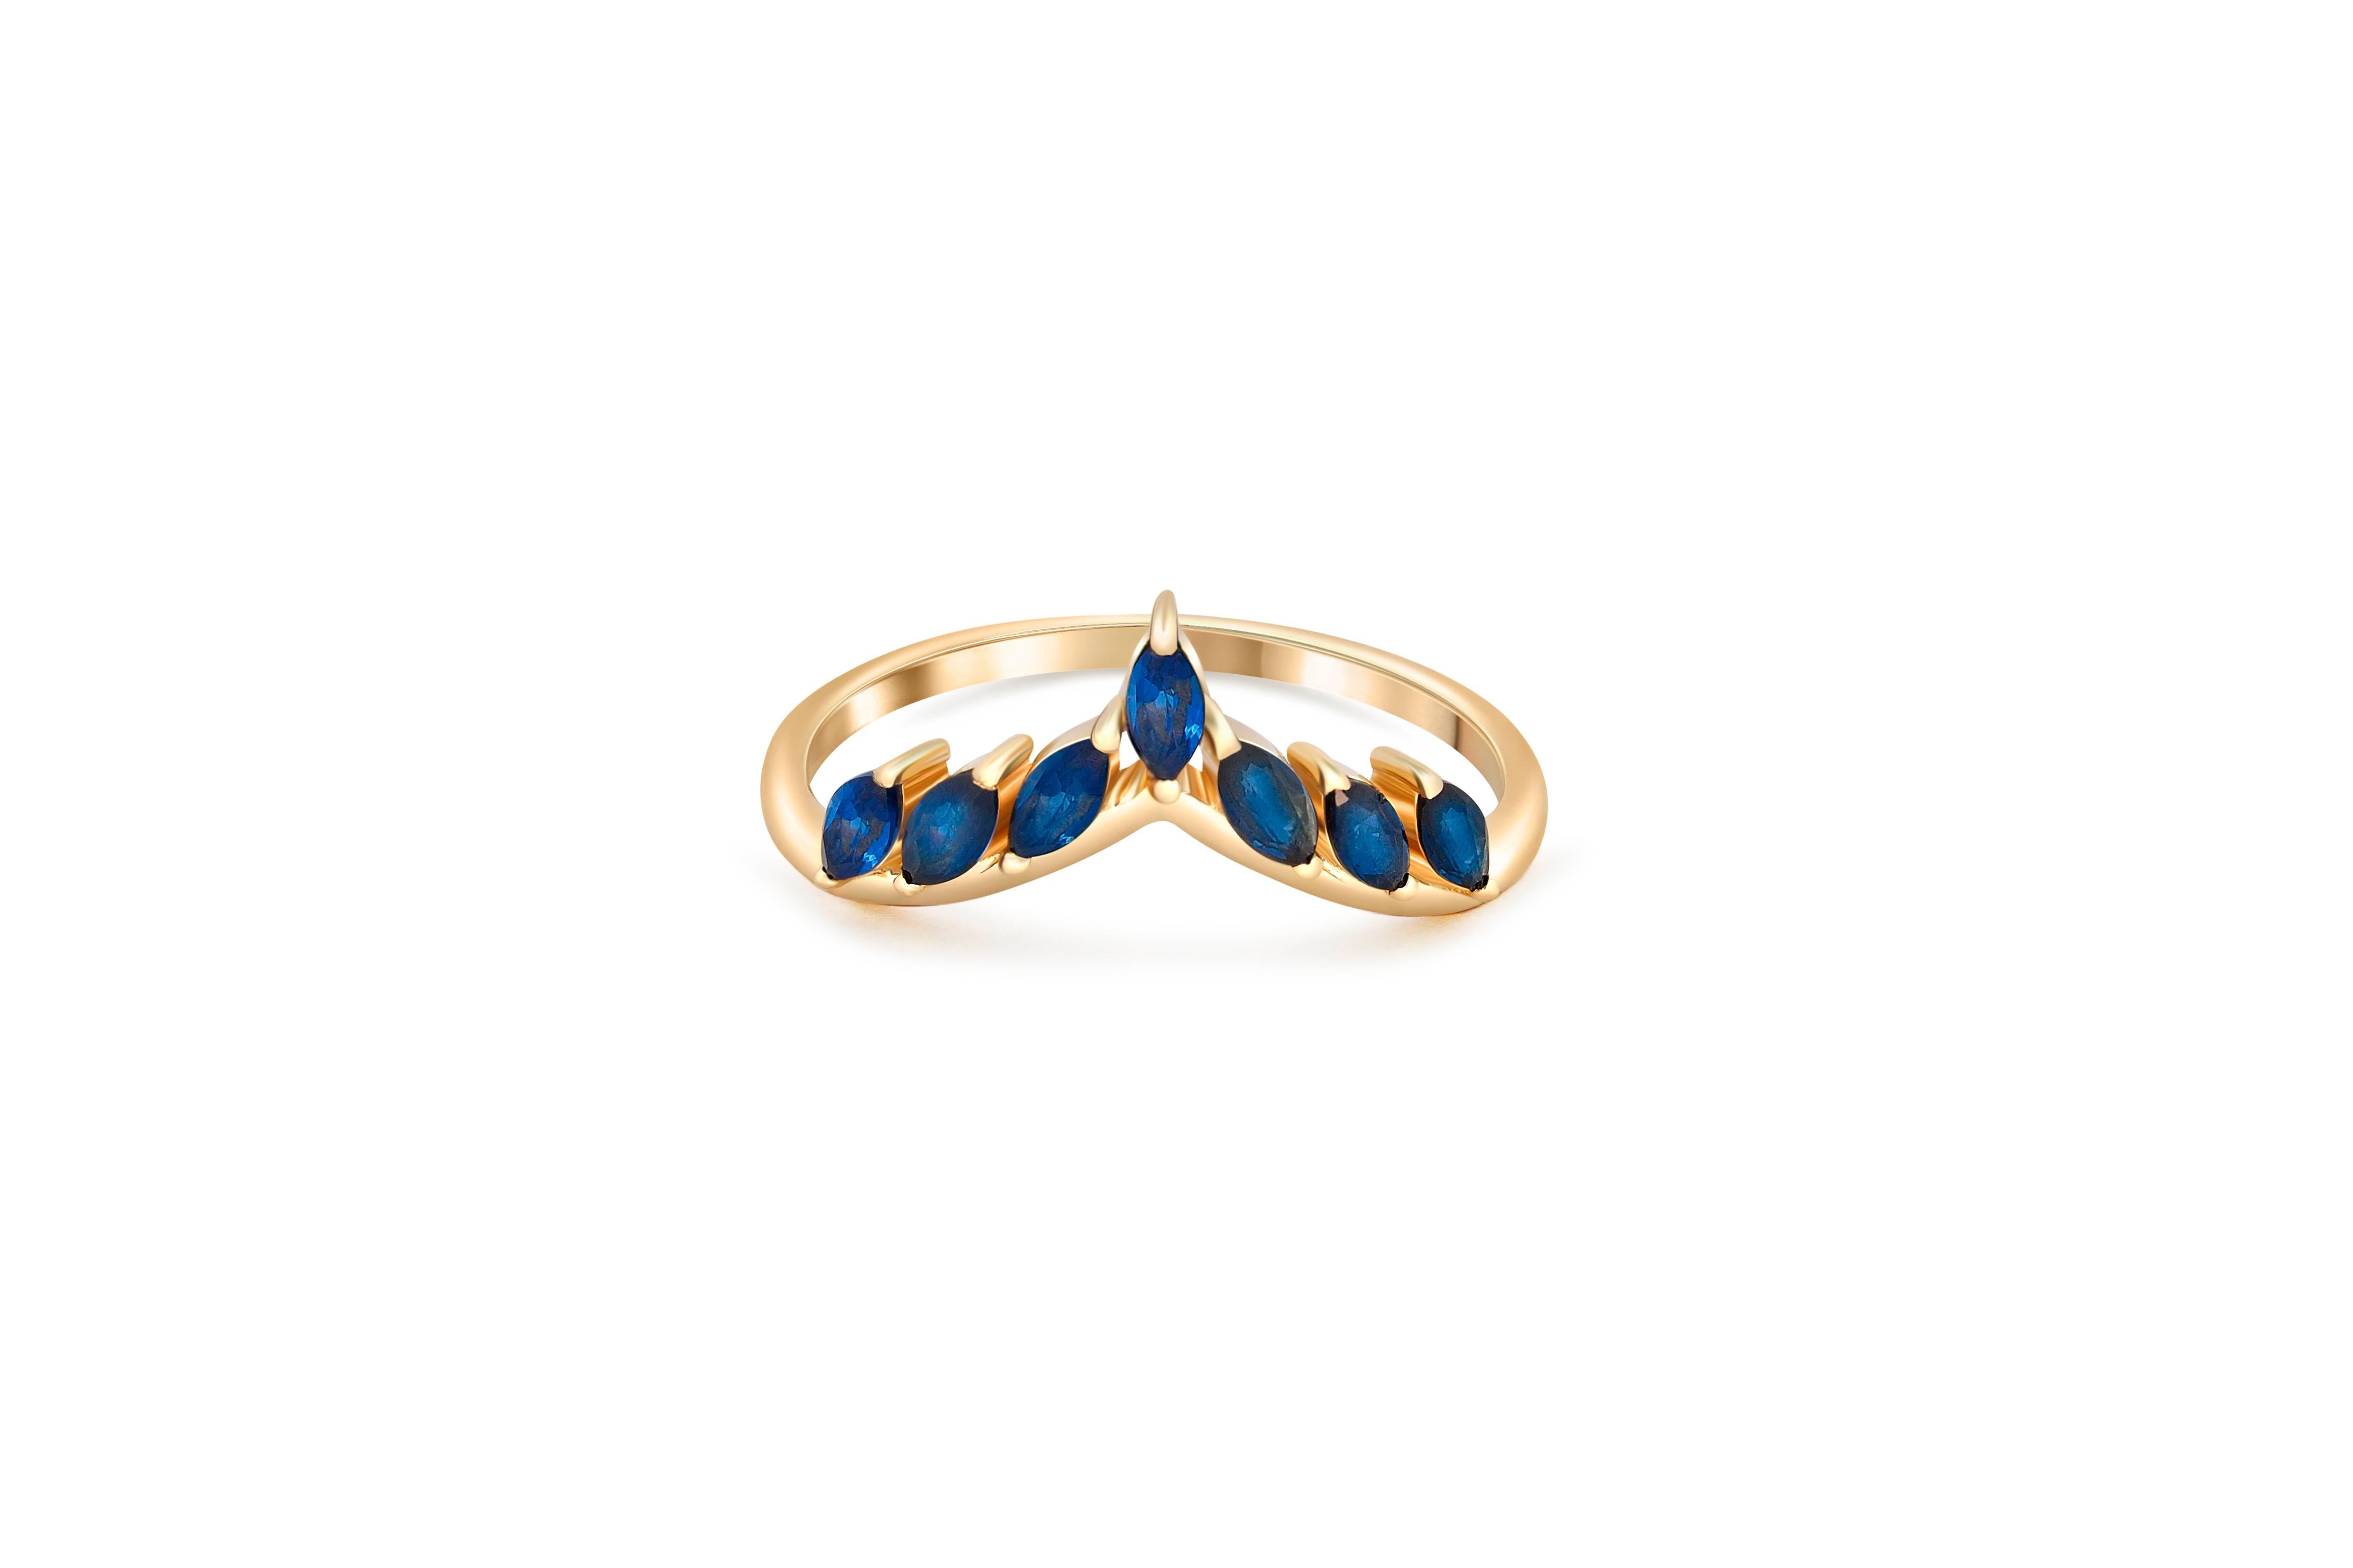 Sapphire Tiara 14k gold ring. 
Crown sapphire ring. Marquise sapphire ring. Blue sapphire ring. Stackable sapphire band.

Metal: 14 karat gold
Weight: 1.85 gr. depends from size.

Sapphires: 7 pieces, 0.15x7 = 1.05 ct total, marquise shape, yellow,